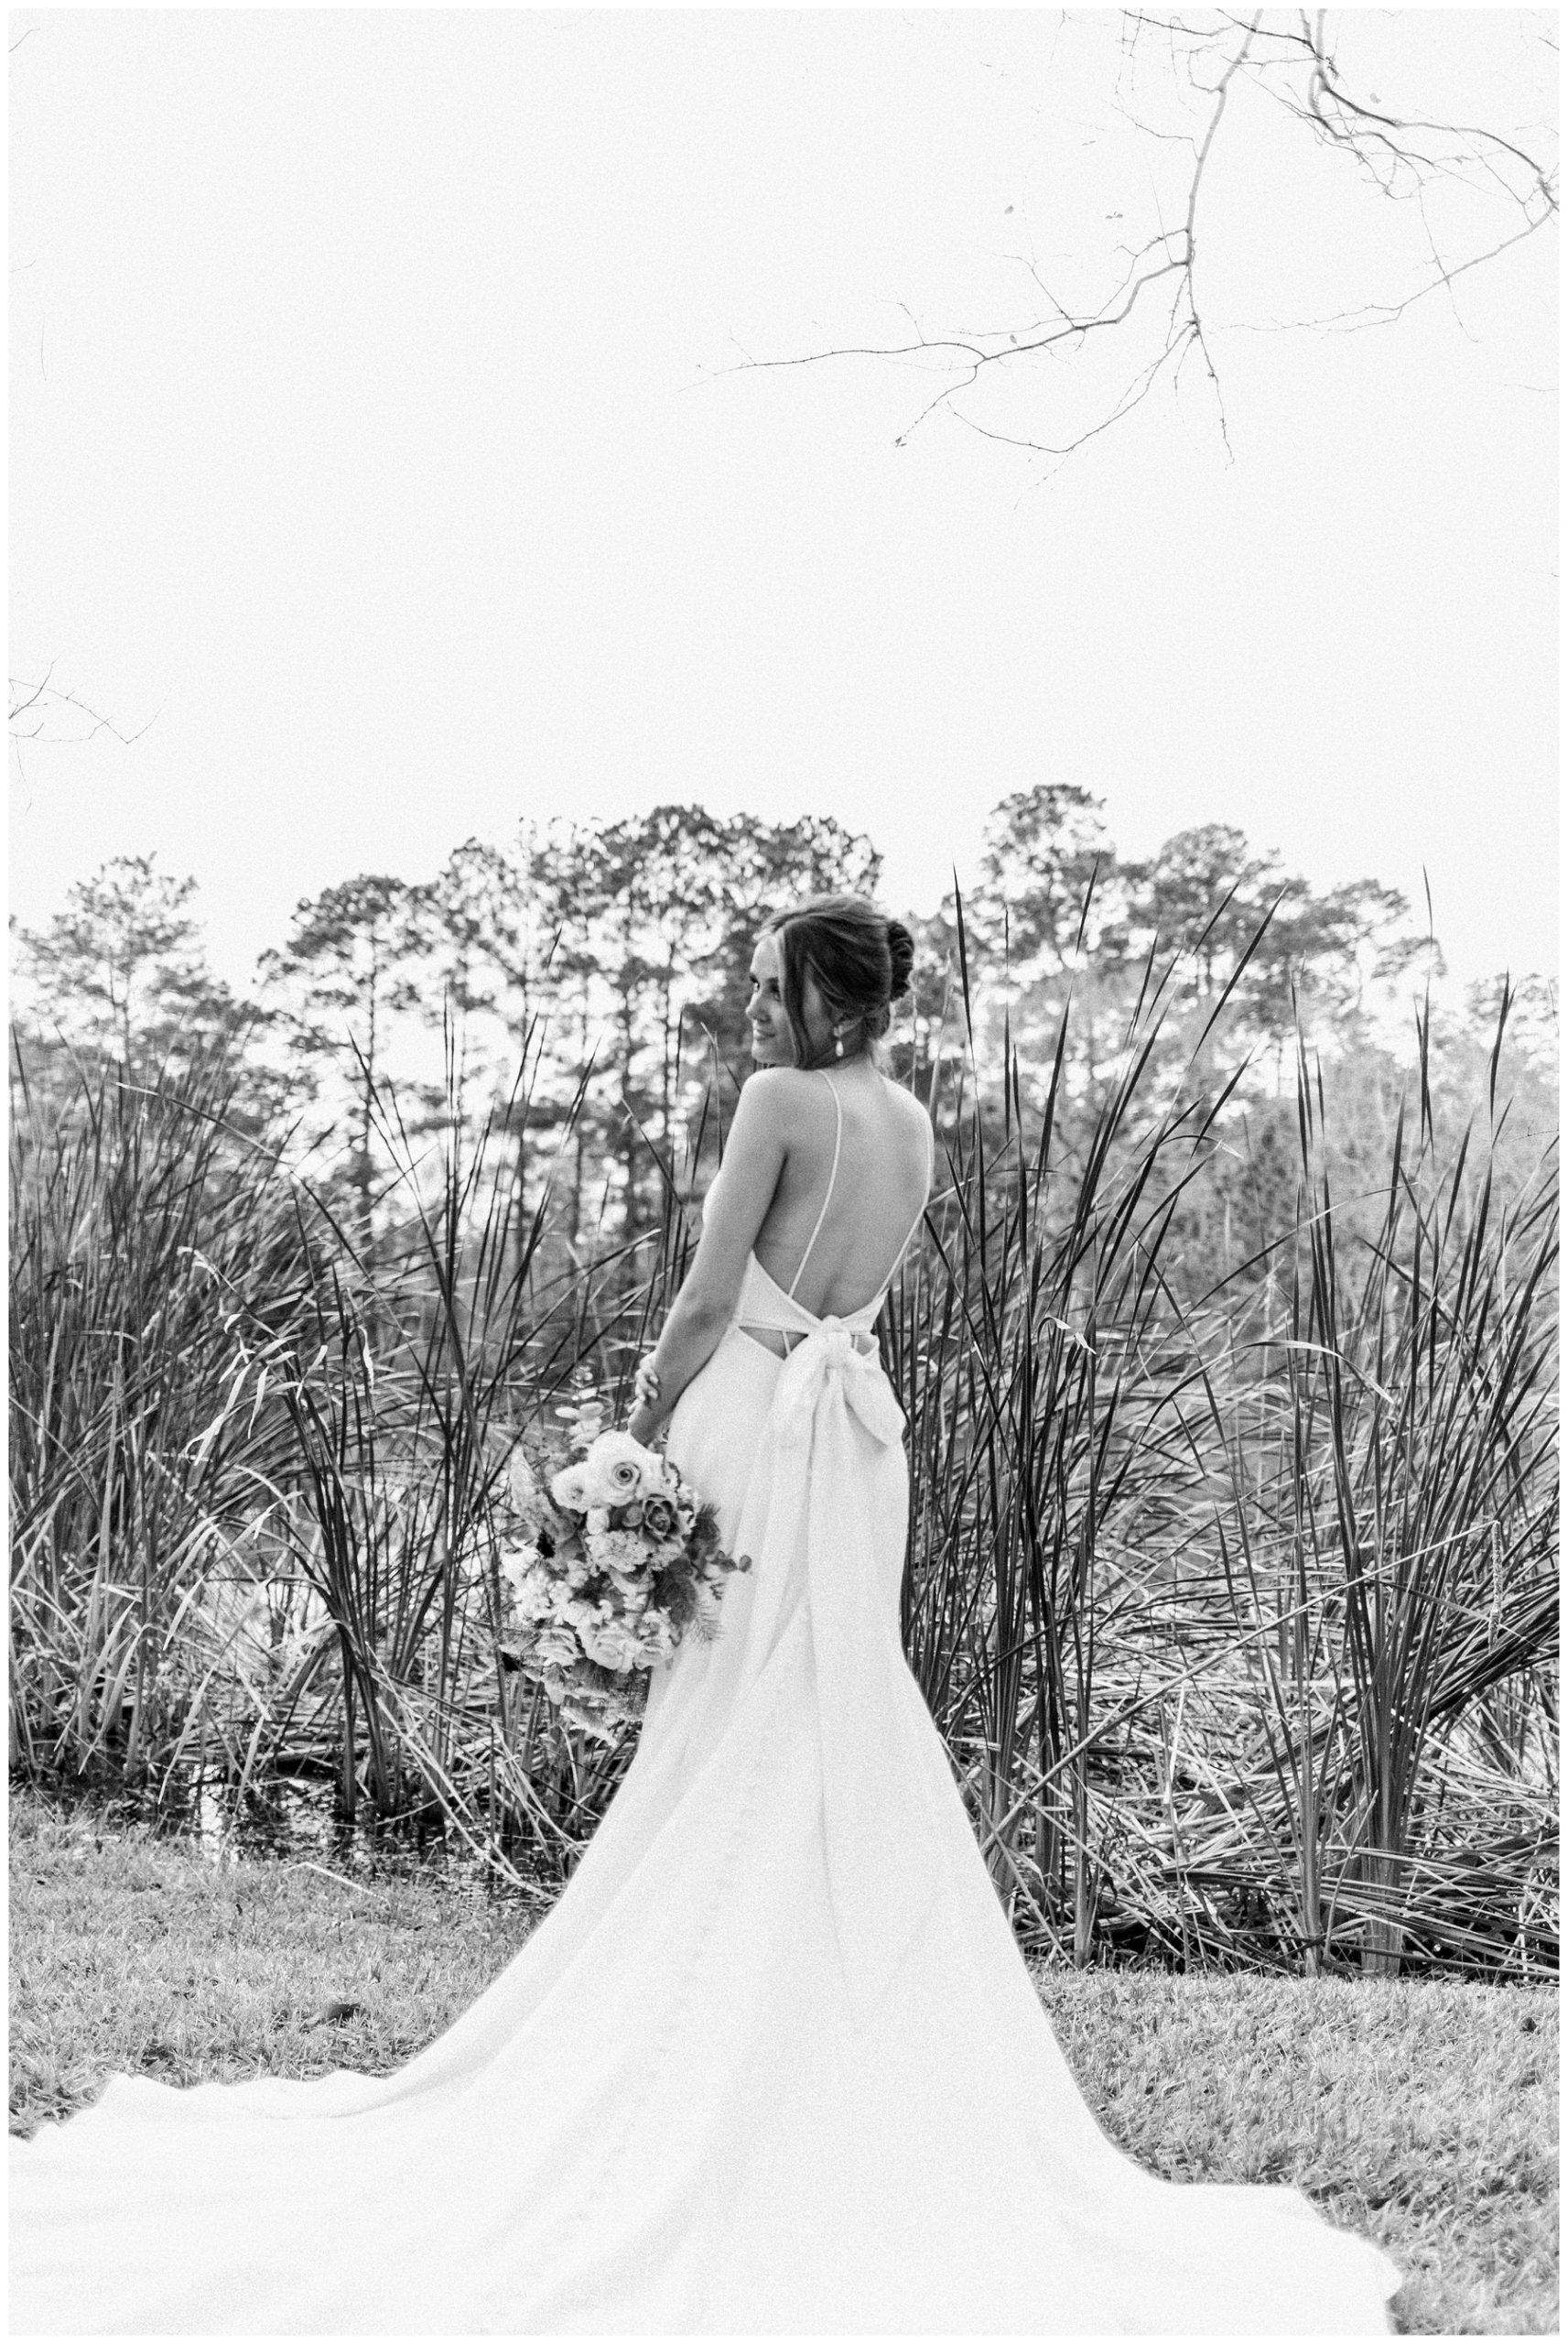 Bride in a Parvani Vida gown with a low back and mermaid skirt